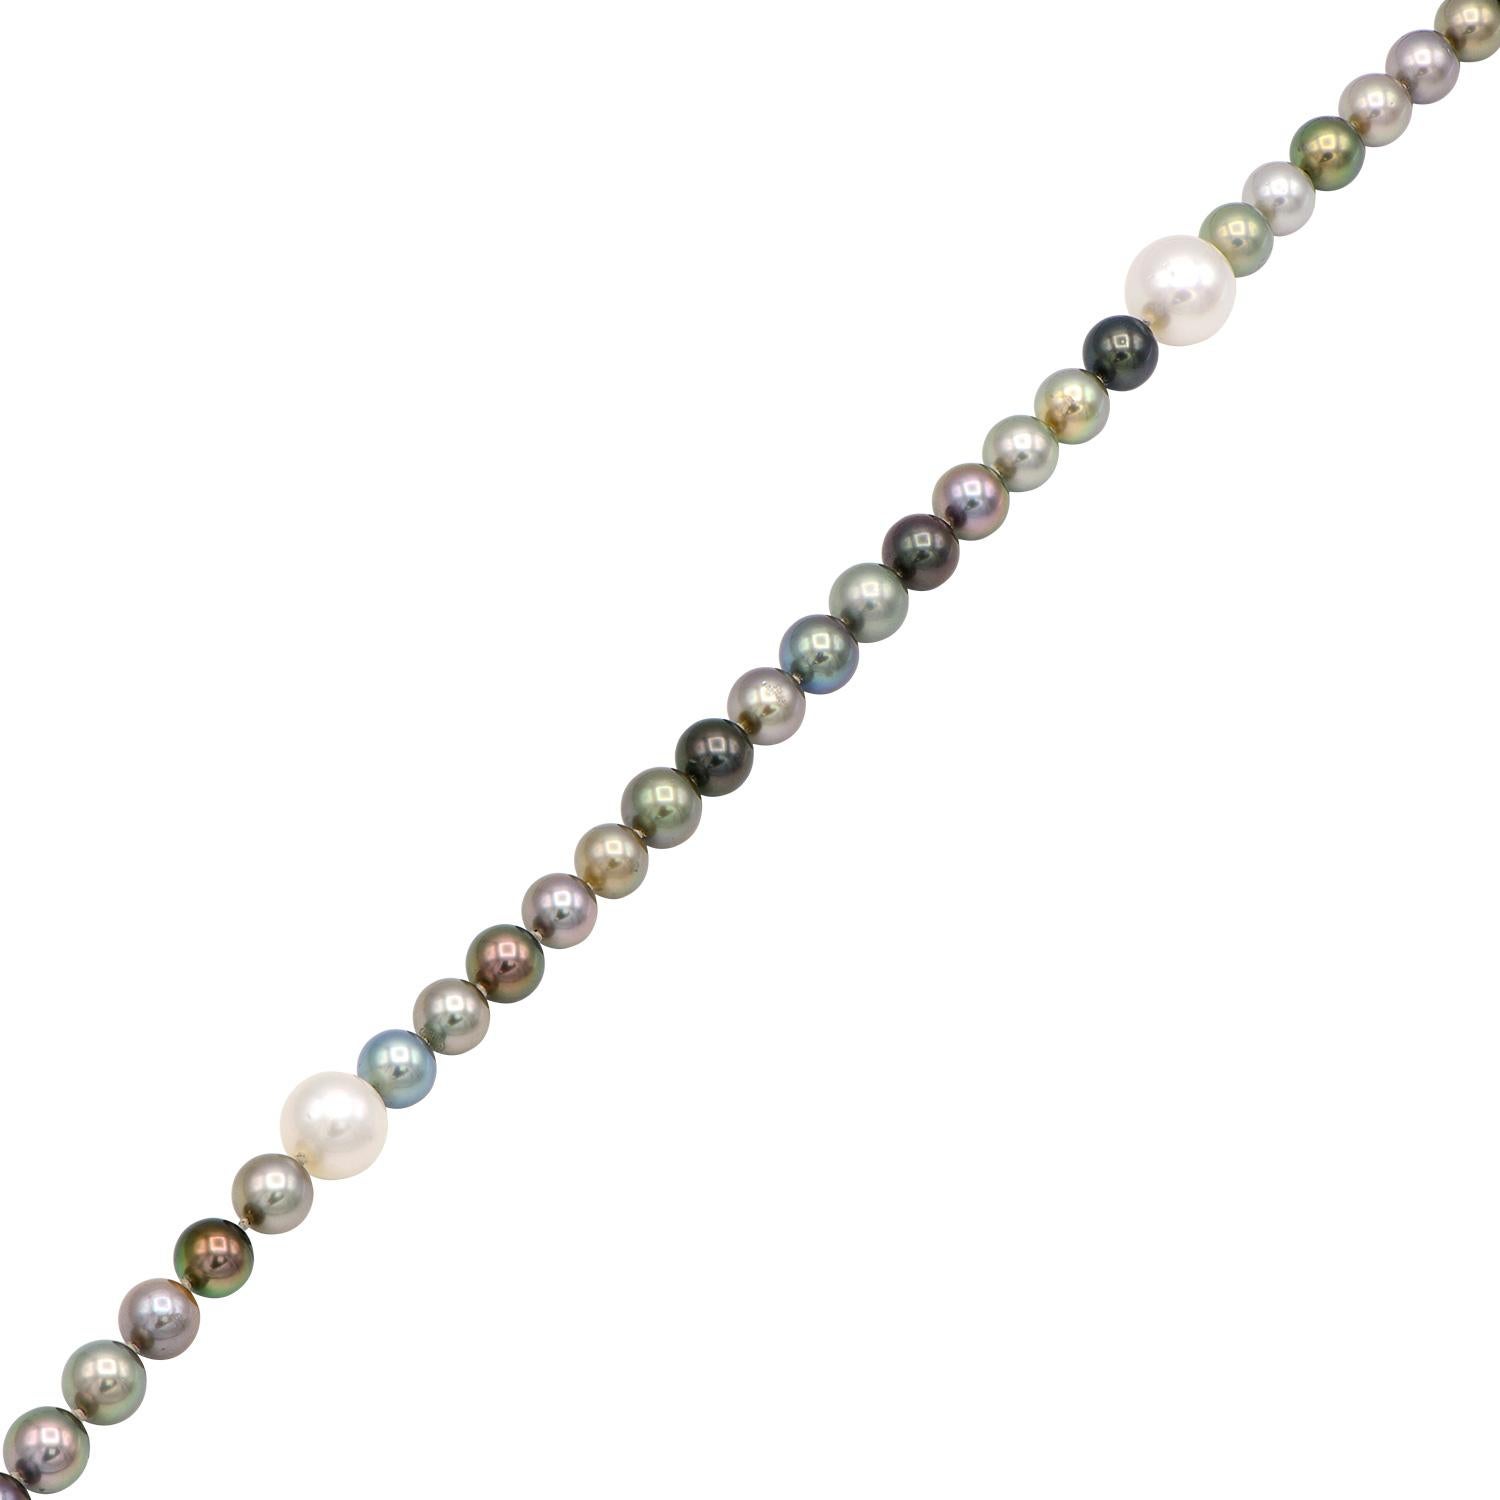 This beautiful pearl rope necklace is made from 130 pieces of South Sea and Tahitian Pearls. The pearls in this 57 inch rope necklace vary in size and color to show all the pearls natural beauty. There is a range from 9-15mm pearls in various shades